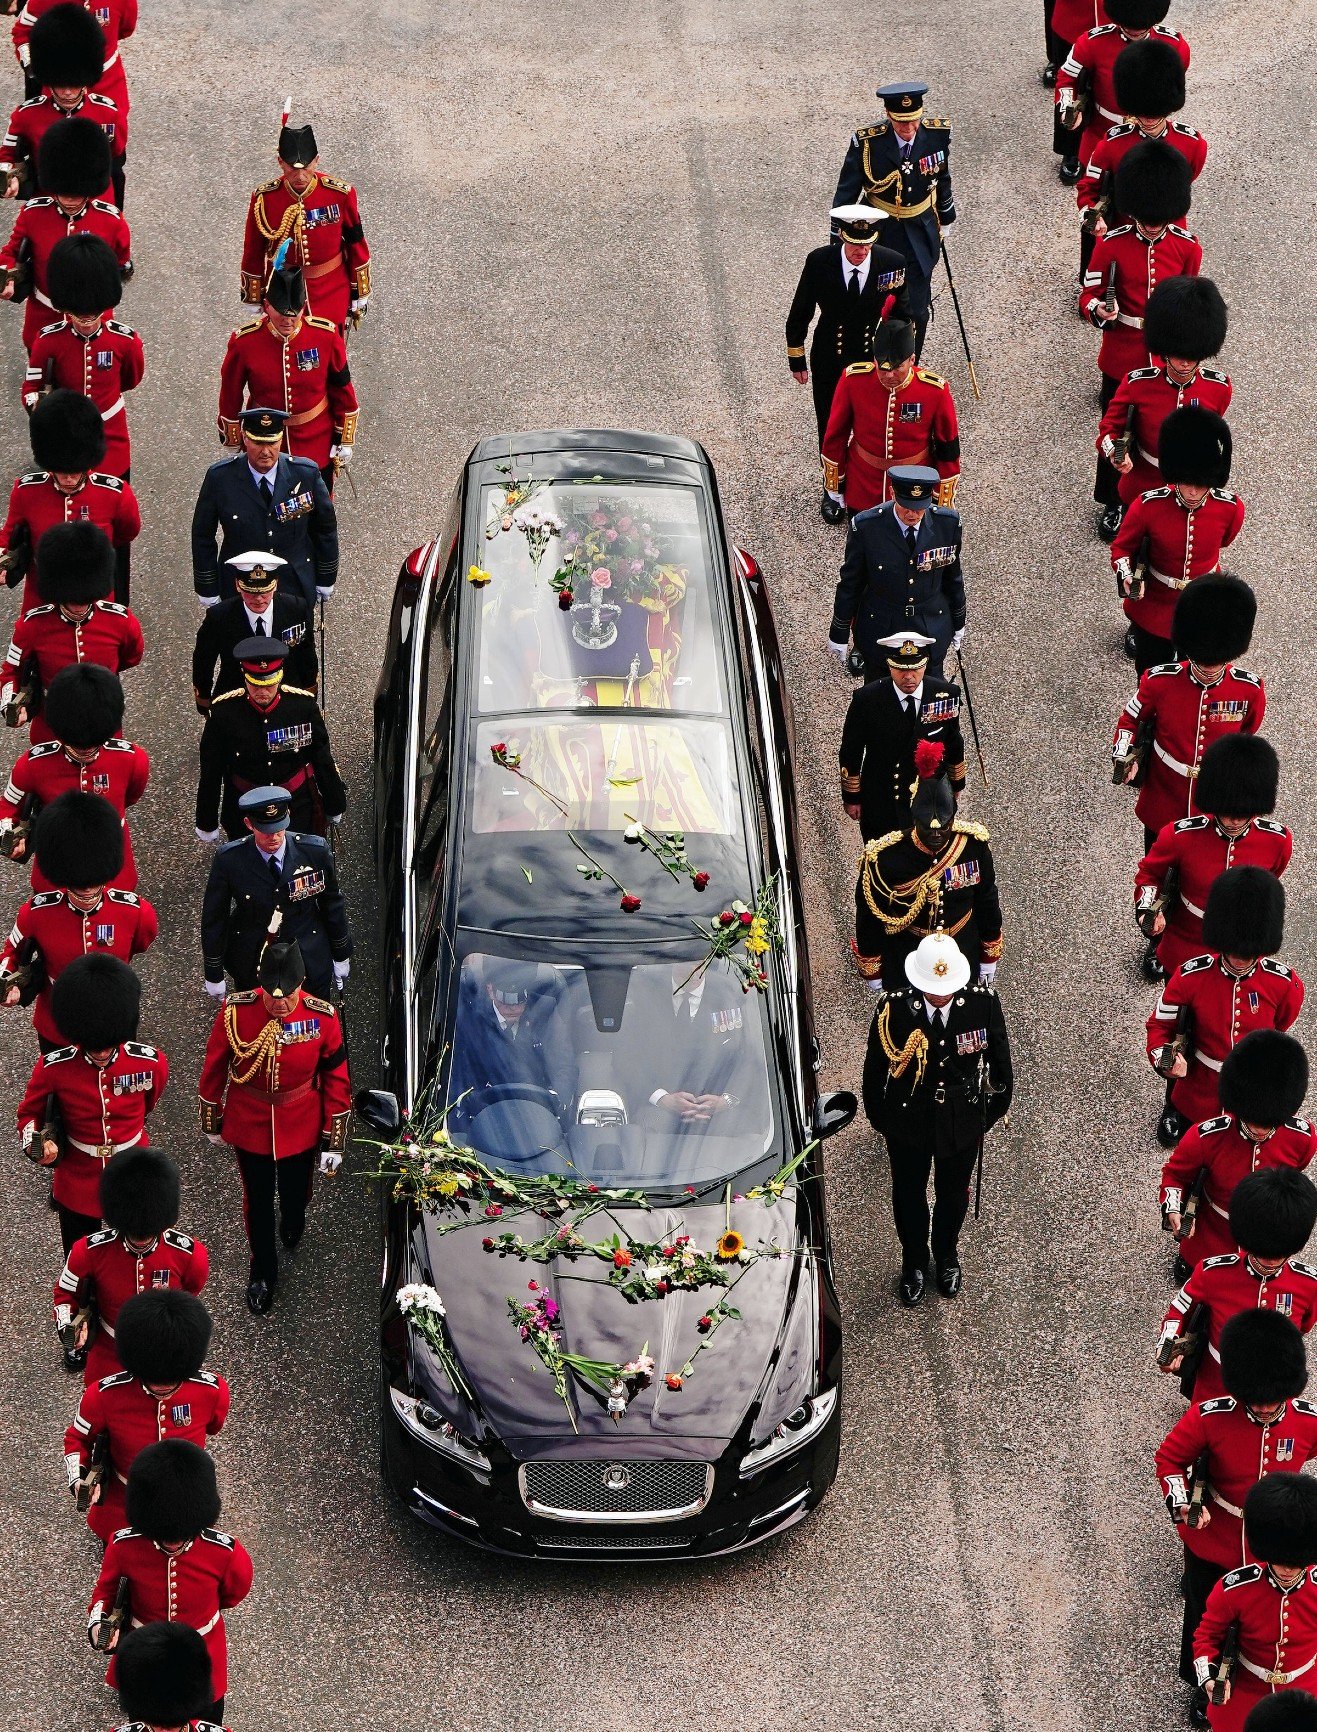 Flowers on the hearse carrying the coffin of Queen Elizabeth II as it arrives at Windsor Castle for the Committal Service in St George's Chapel.